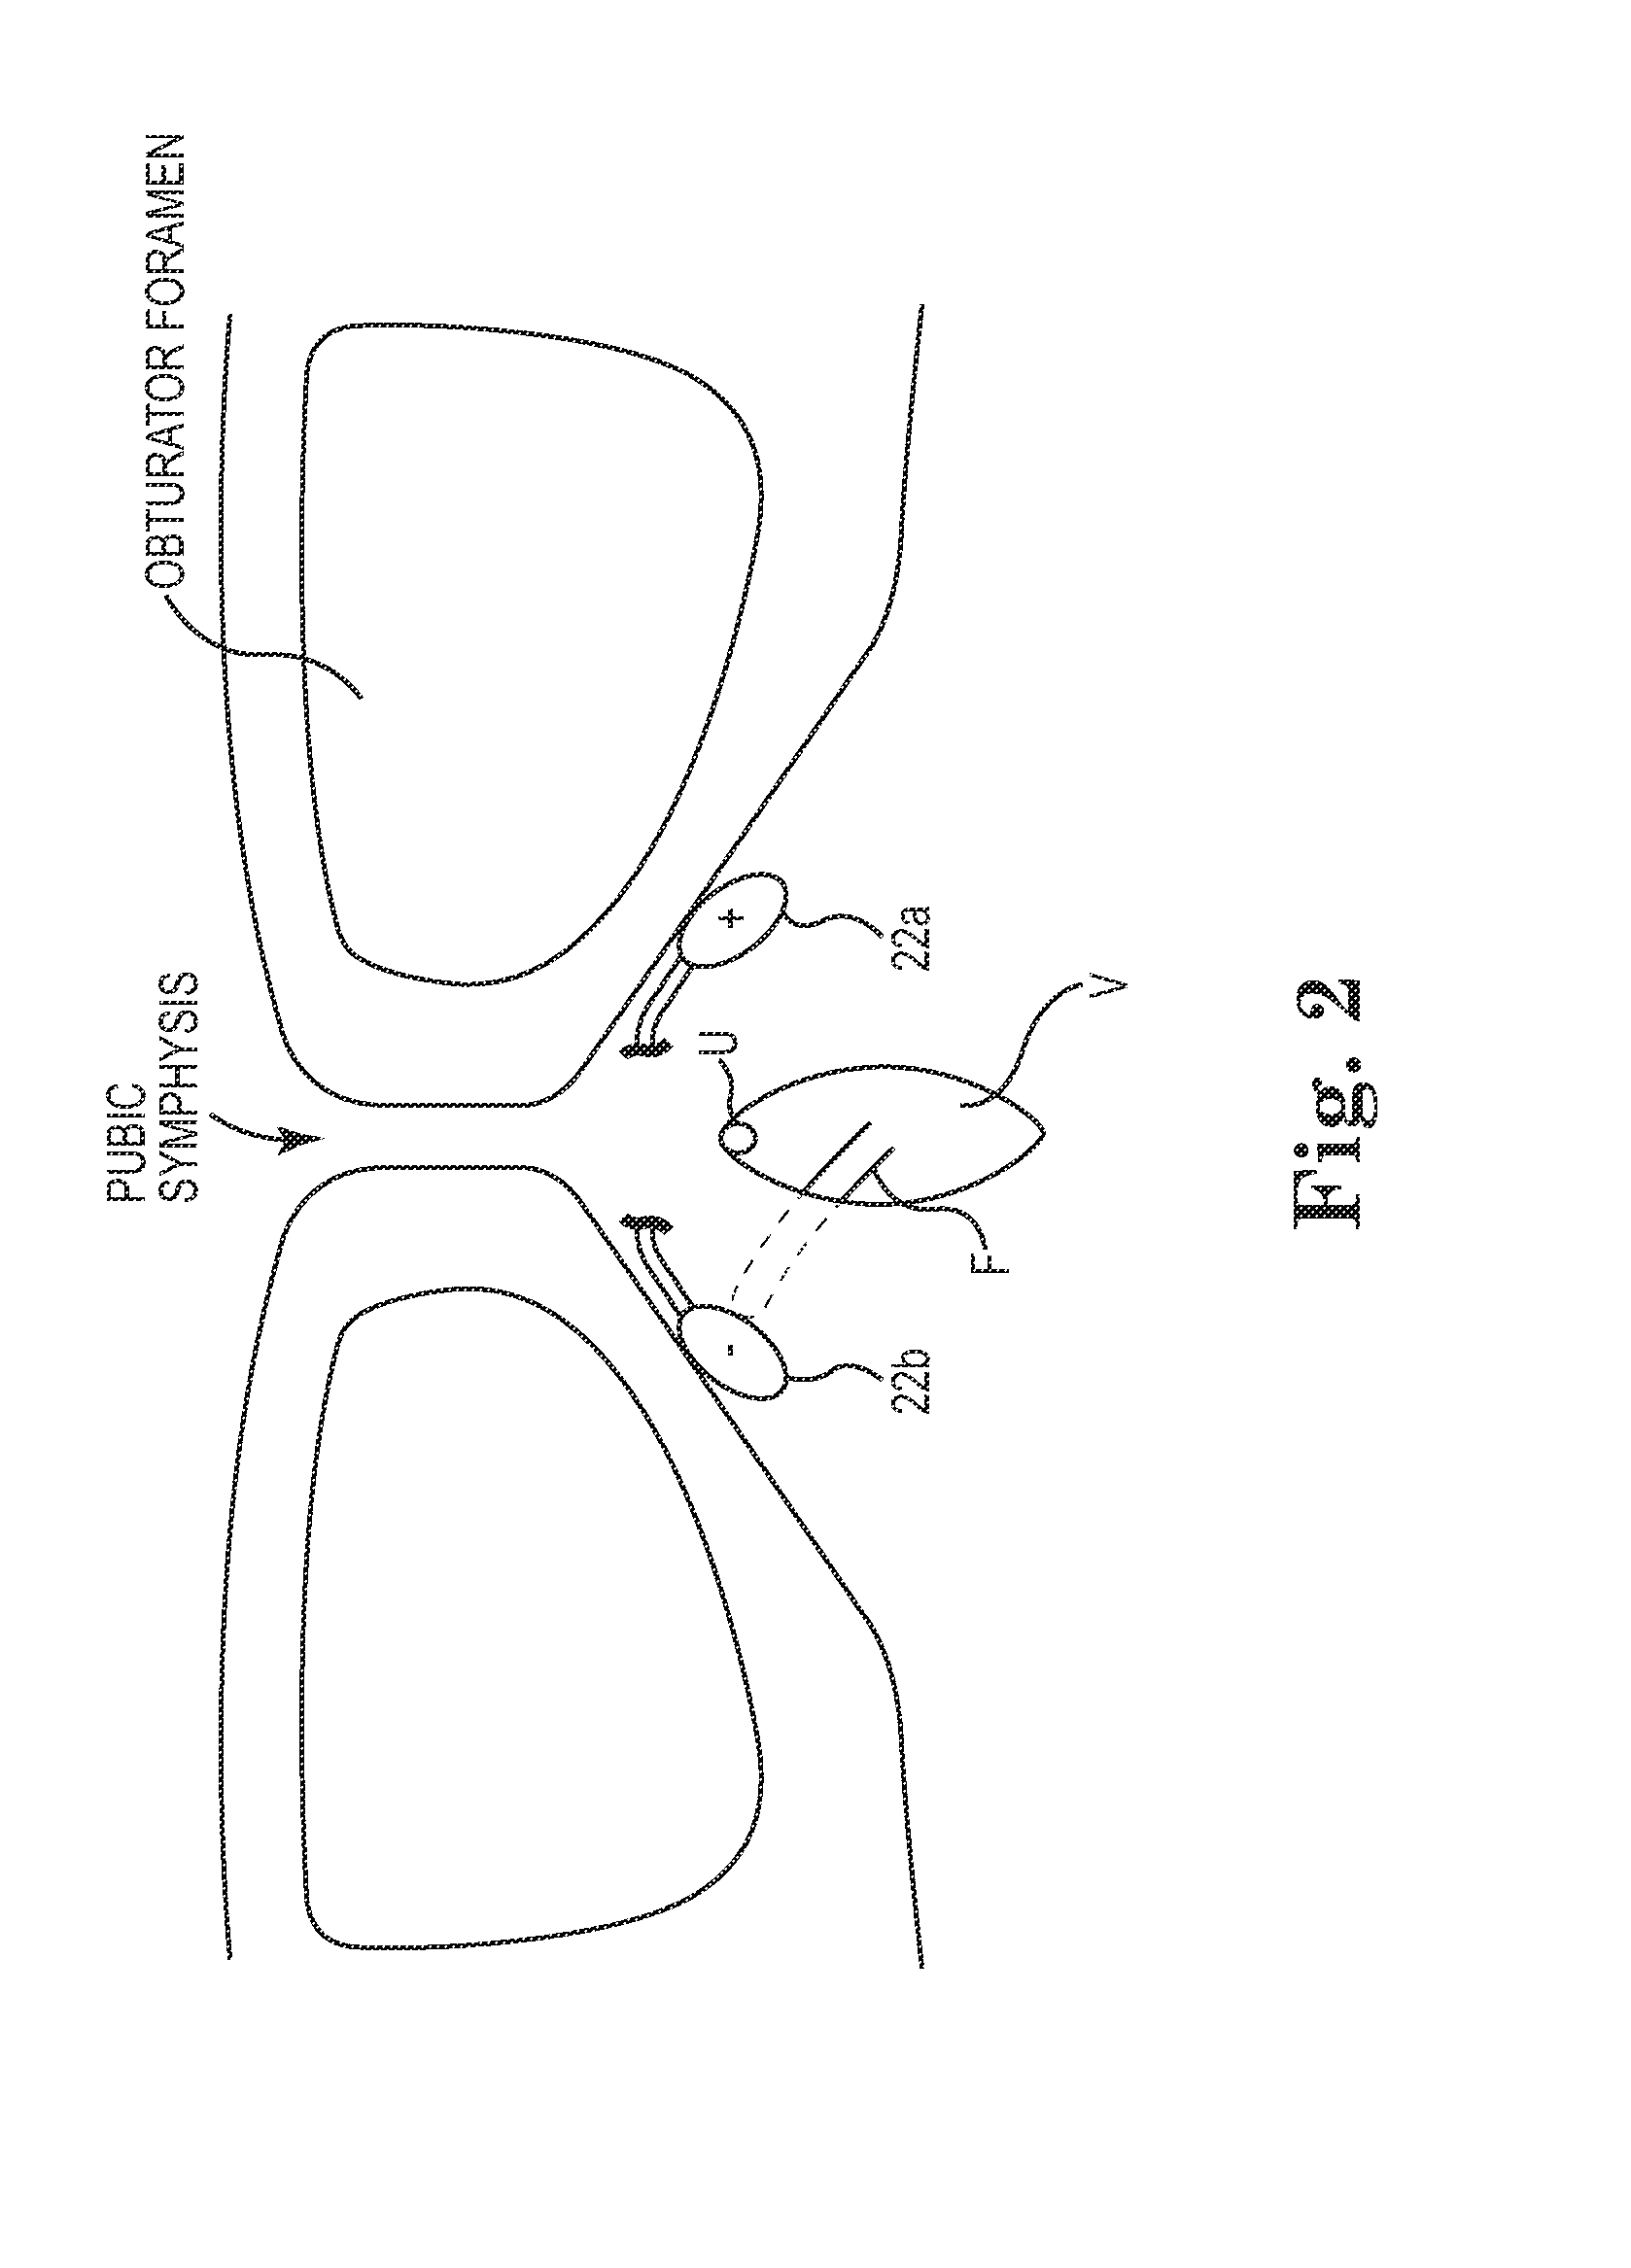 Implant Tension Adjustment System and Method